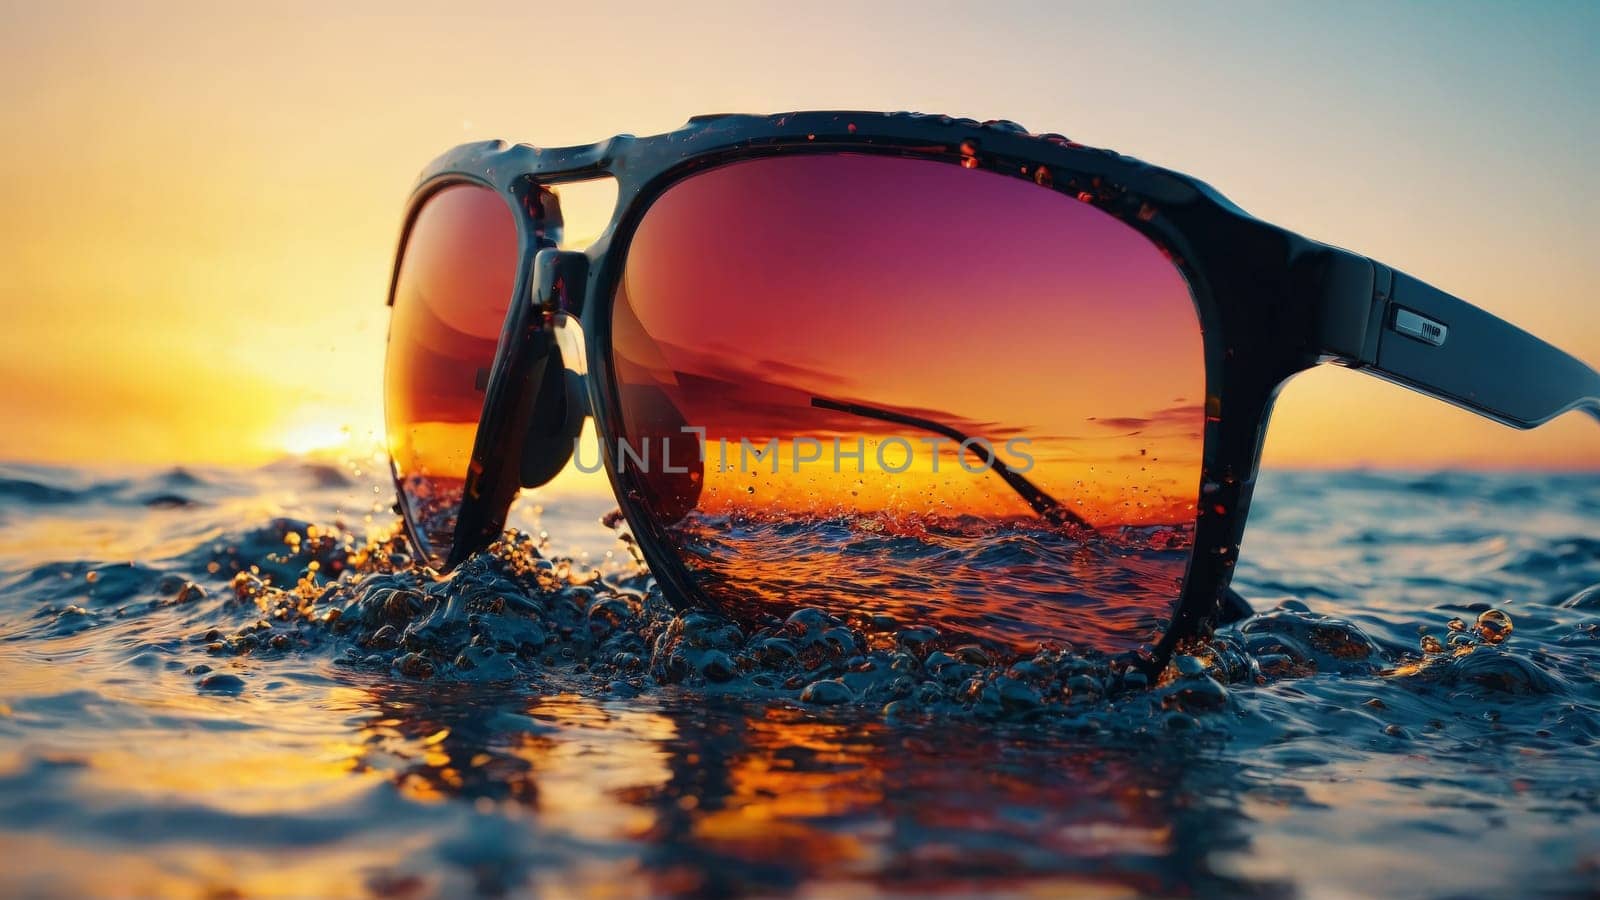 Sea water droplets on sunglasses reflecting sunset summer vacation vibes carefree adventure wanderlust inspiration Abstract background by panophotograph